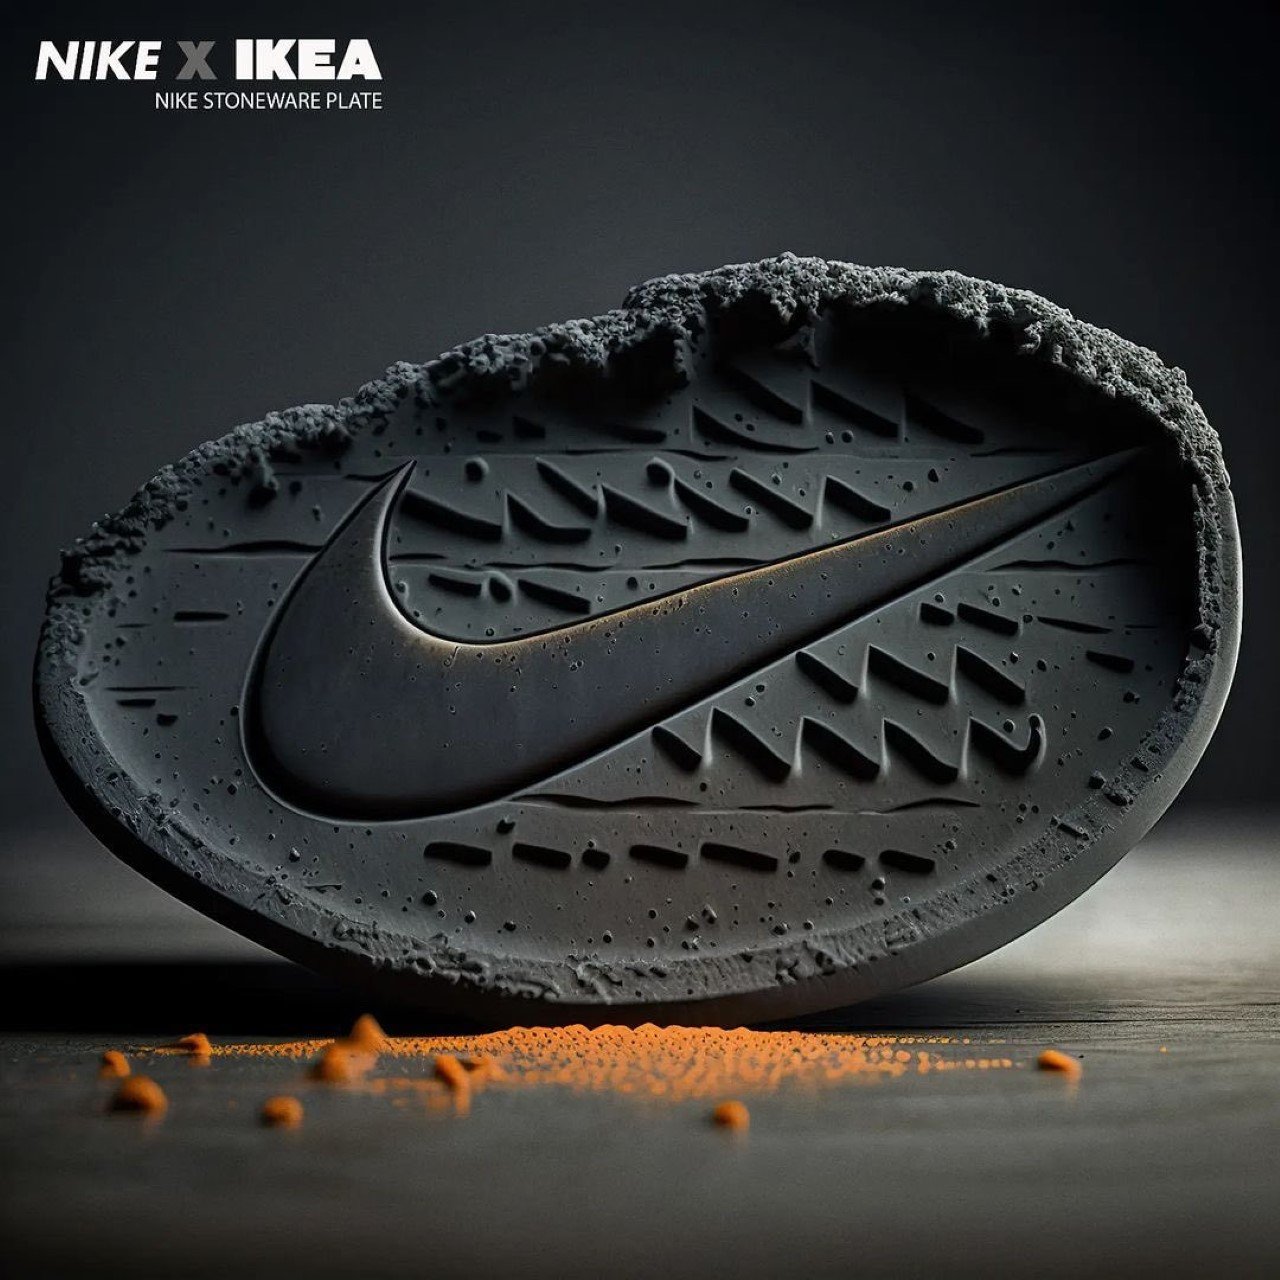 The Ultimate Nike x IKEA Mashup: These Sporty Home Decor Items Were Created by an AI